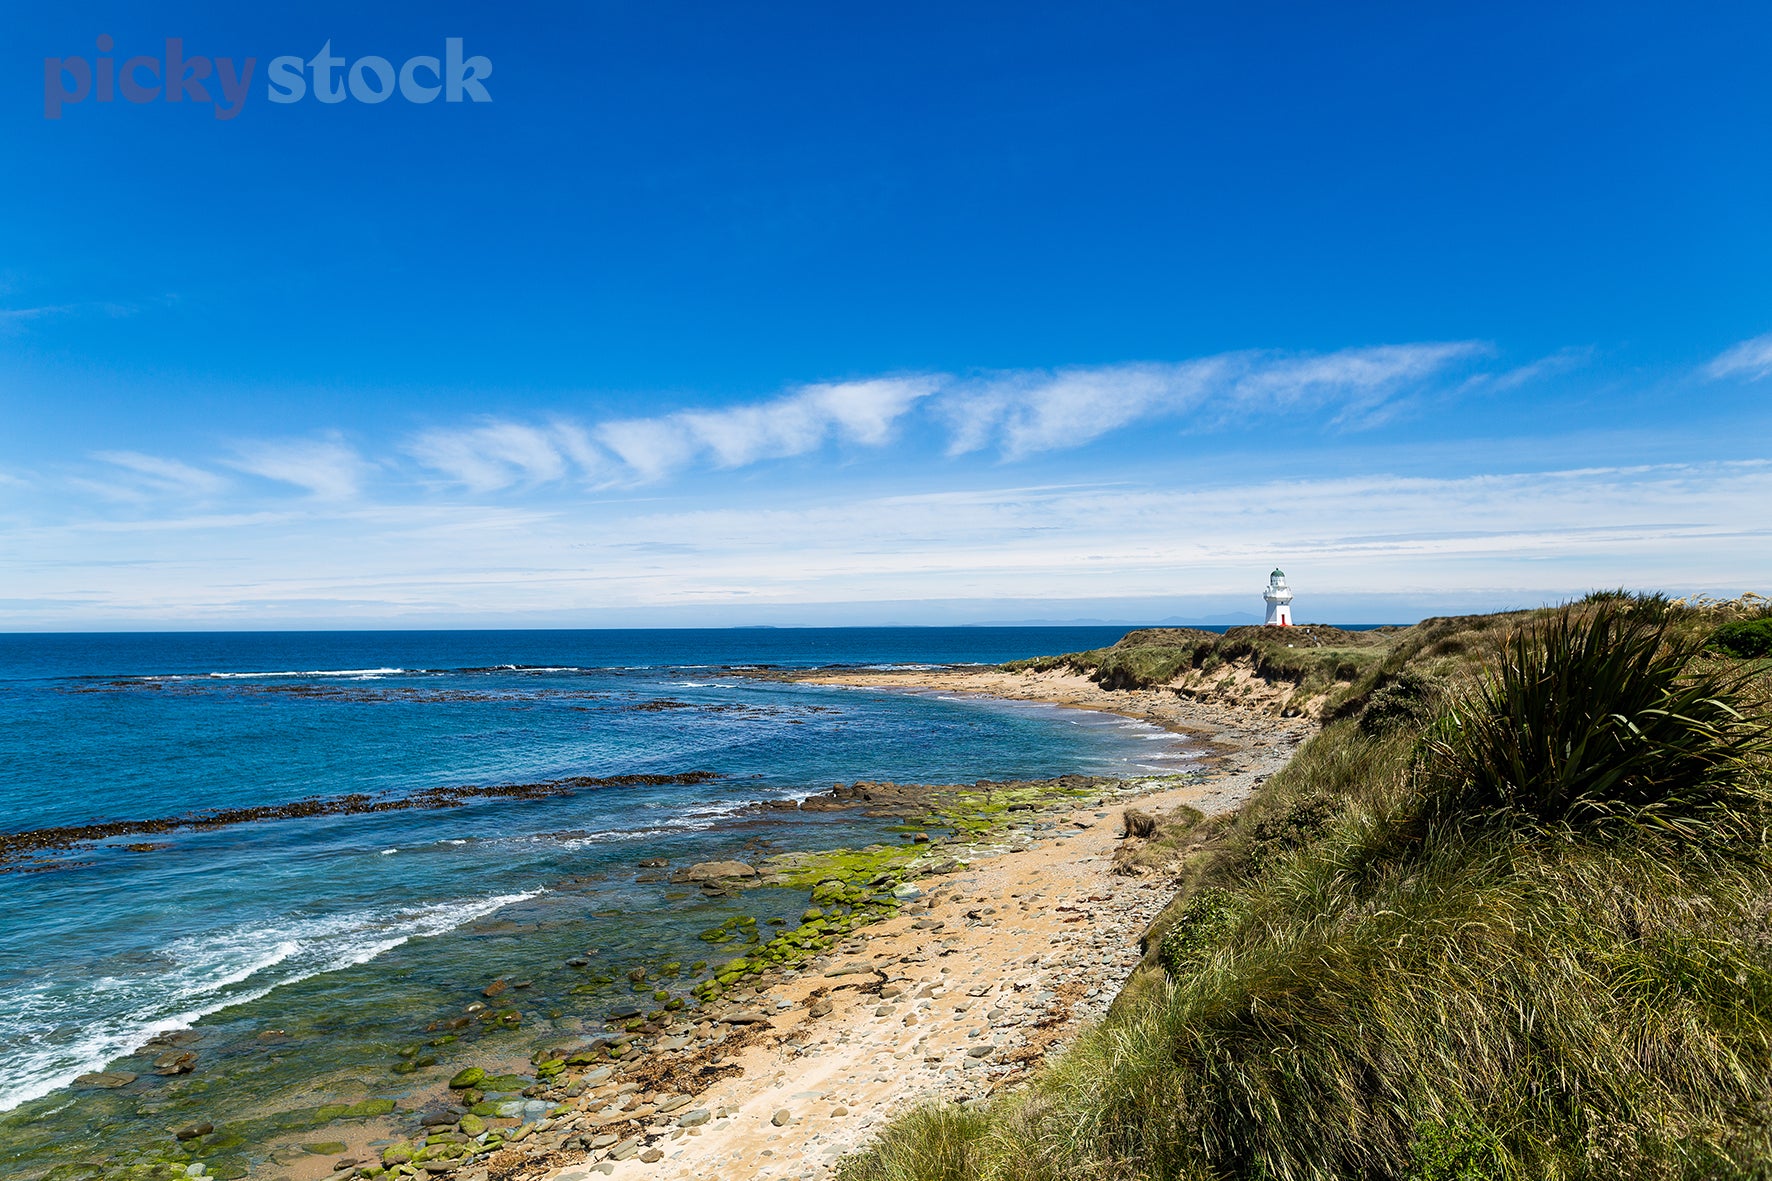 Rock beach scene with a lighthouse in the far distance. Sky is very blue with scattered cloud.  Water is blue and calm. 